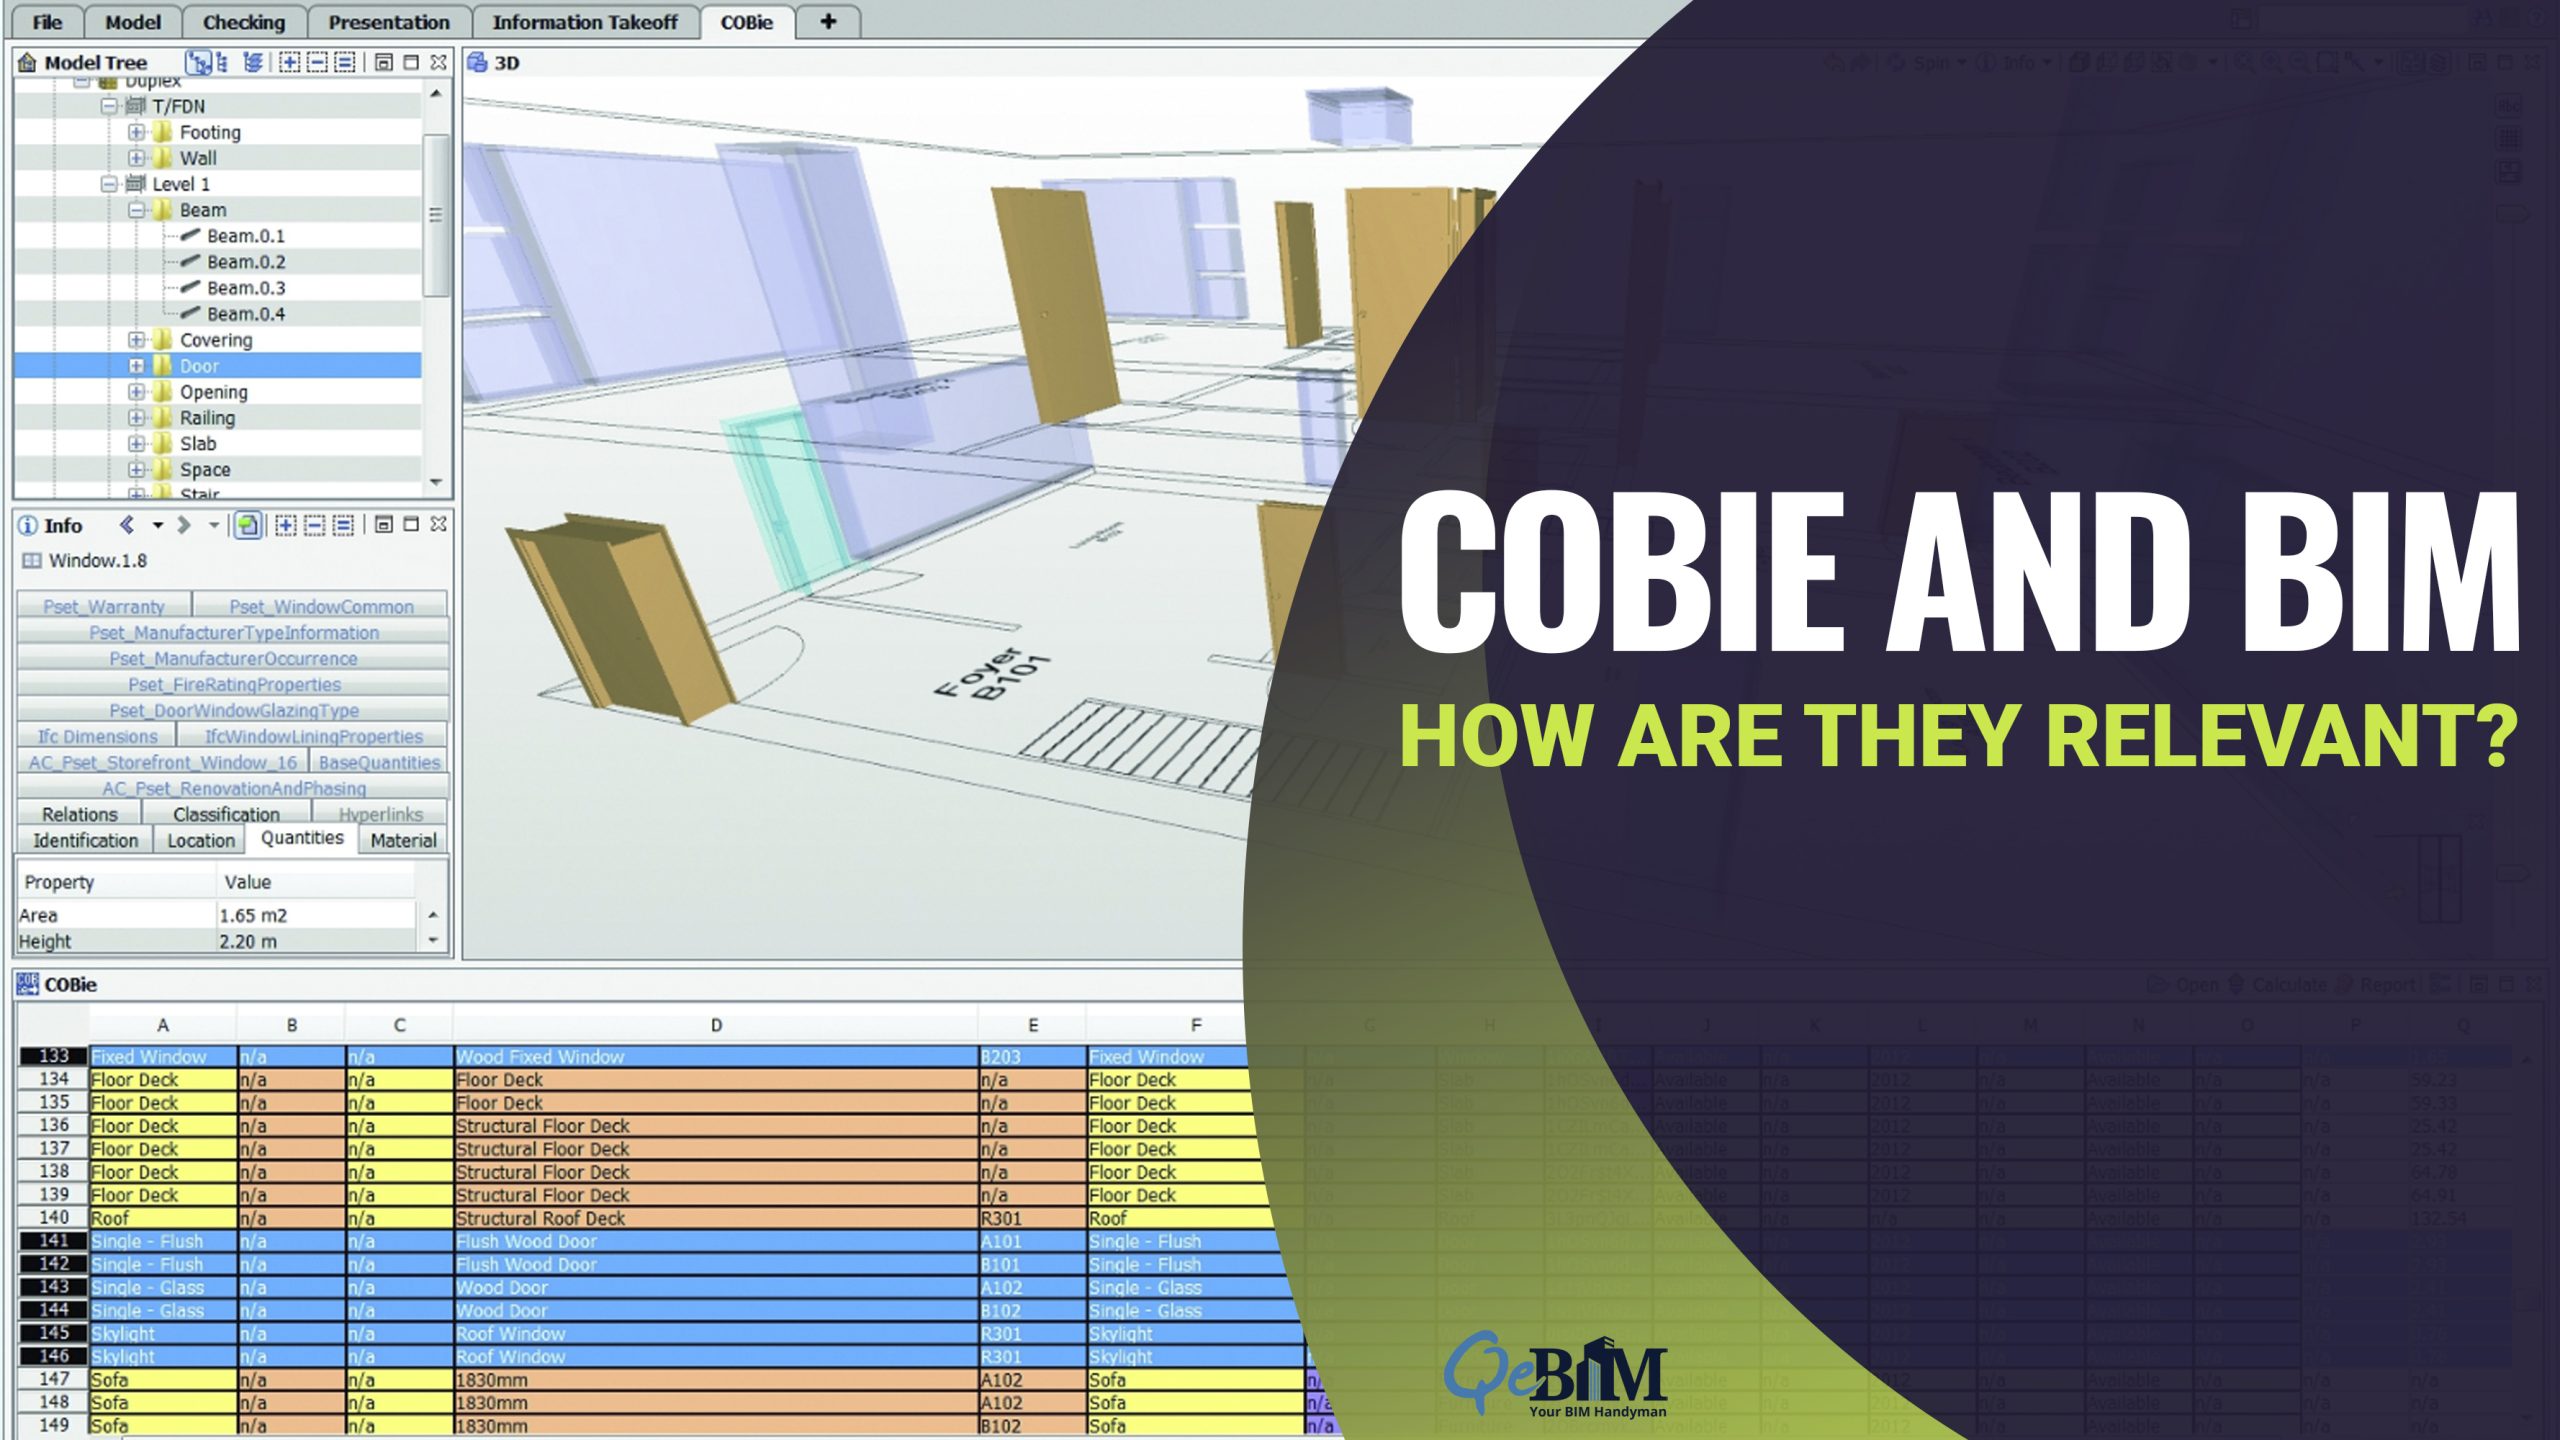 COBie and BIM: How are They Relevant?